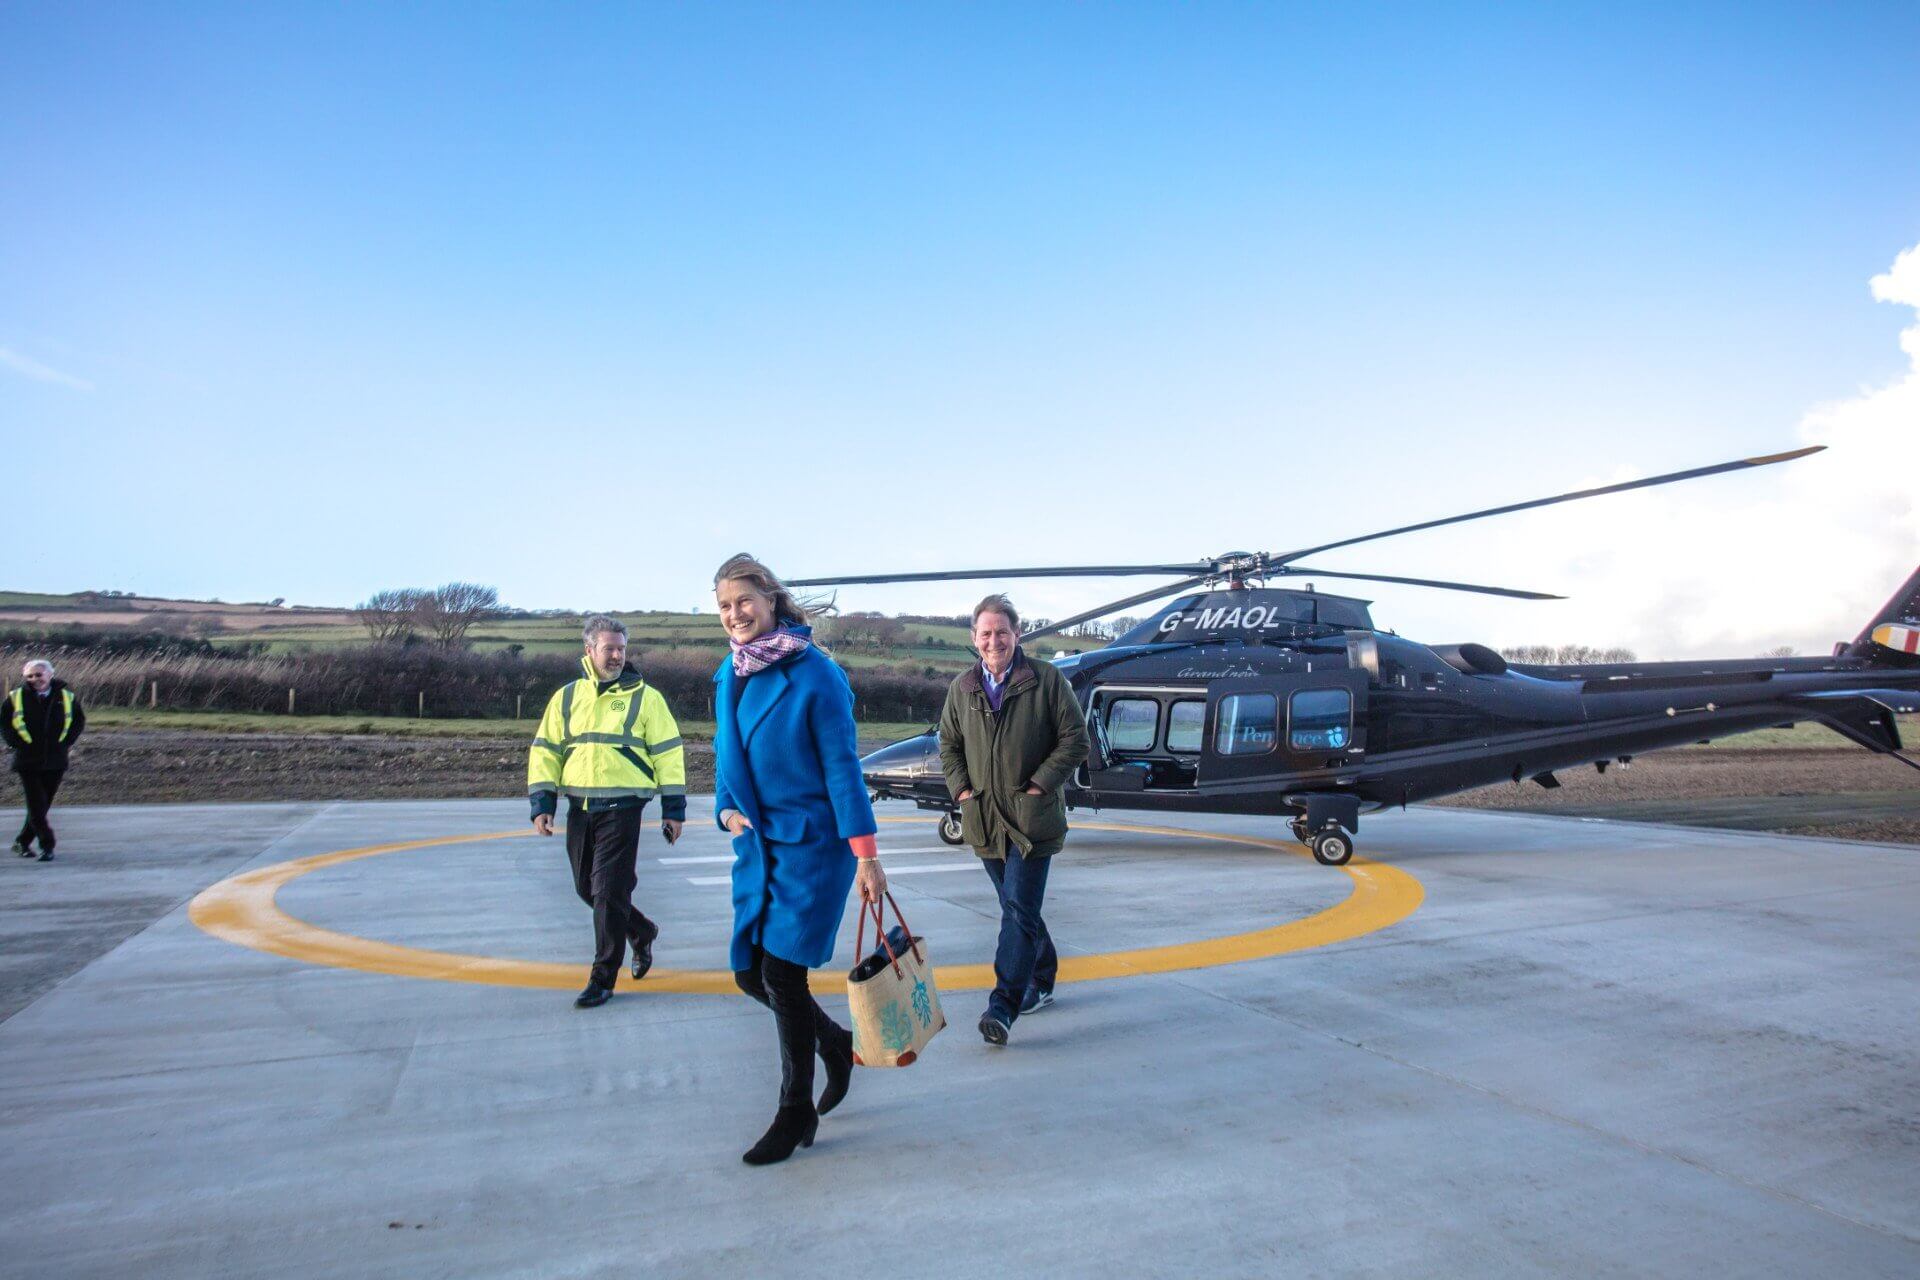 "Our Penzance Helicopters service will be of great benefit to both islanders and visitors - much improving connectivity to the Isles of Scilly.